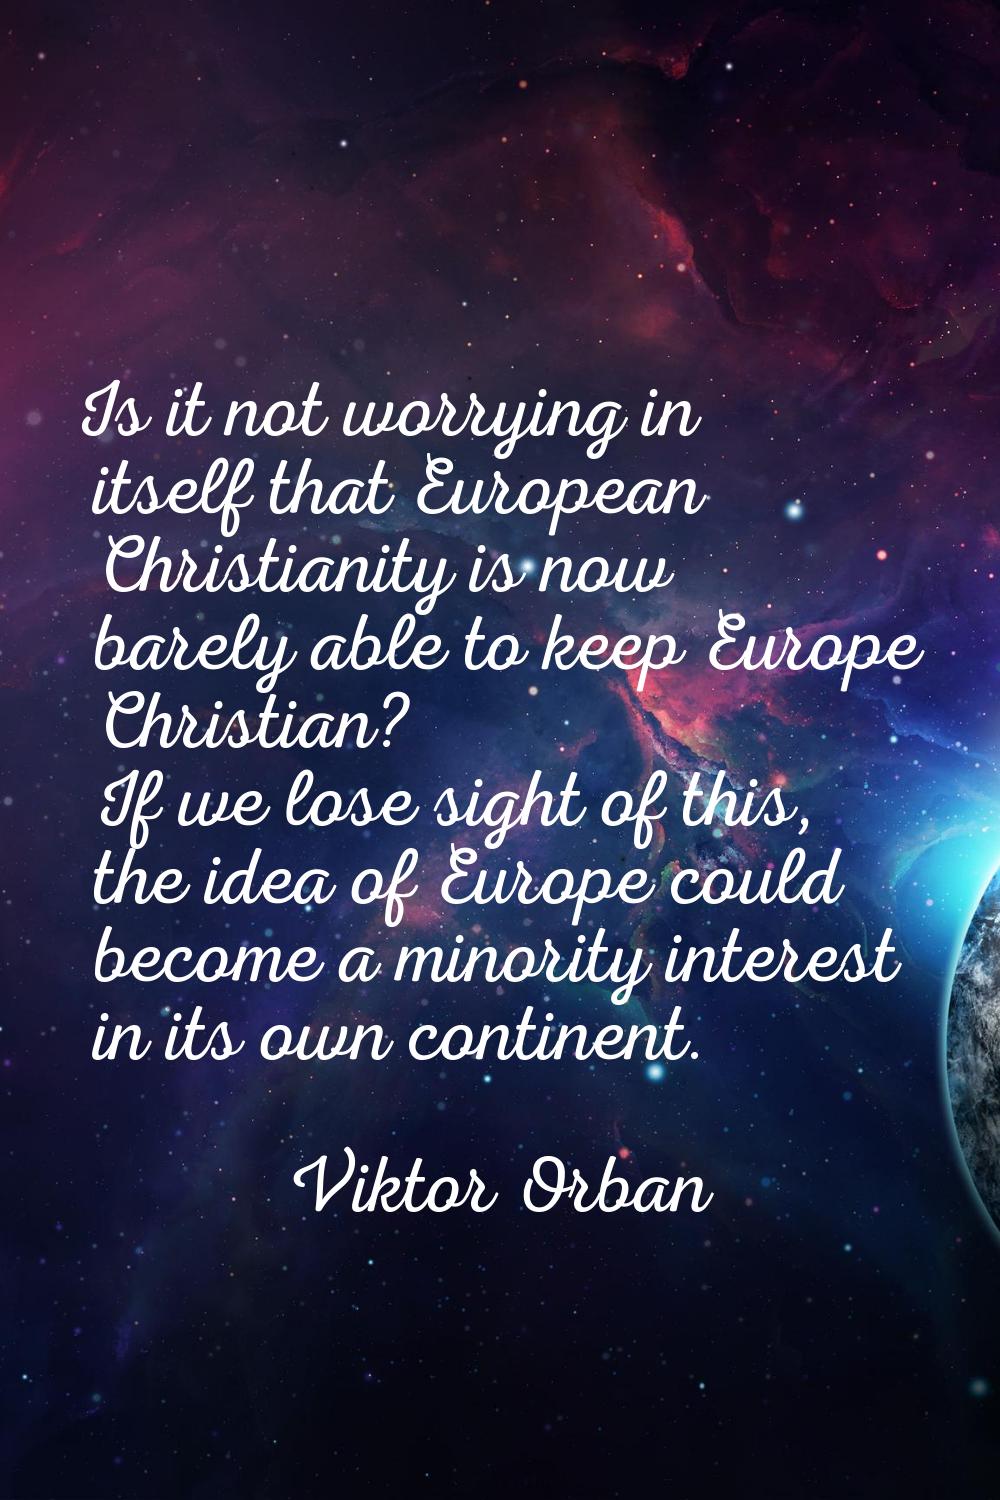 Is it not worrying in itself that European Christianity is now barely able to keep Europe Christian